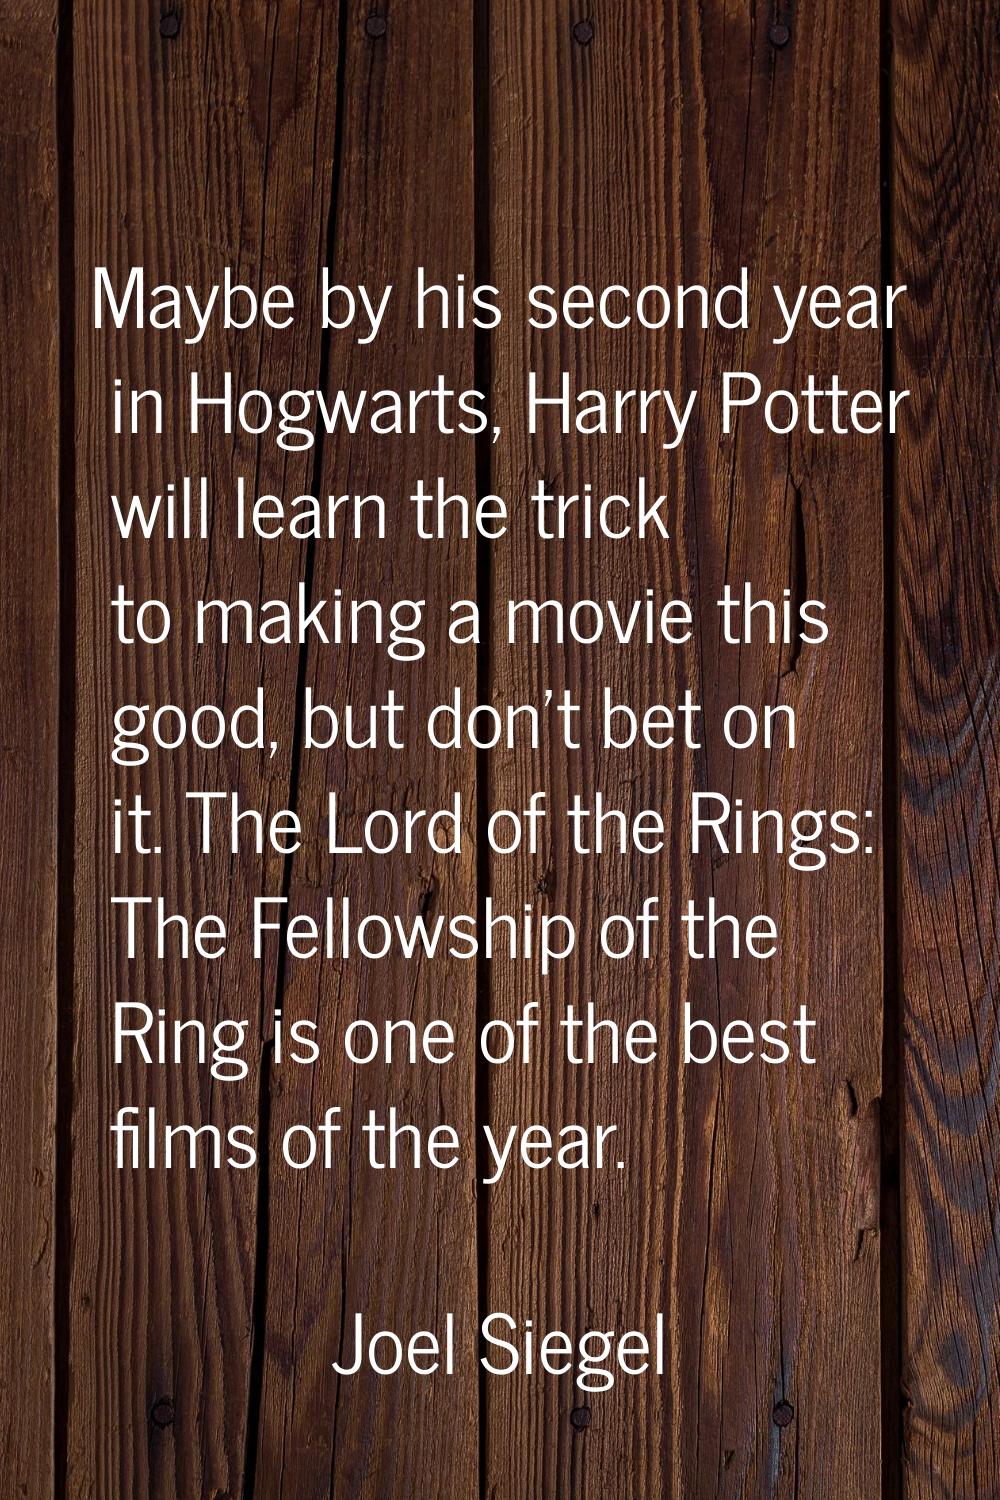 Maybe by his second year in Hogwarts, Harry Potter will learn the trick to making a movie this good